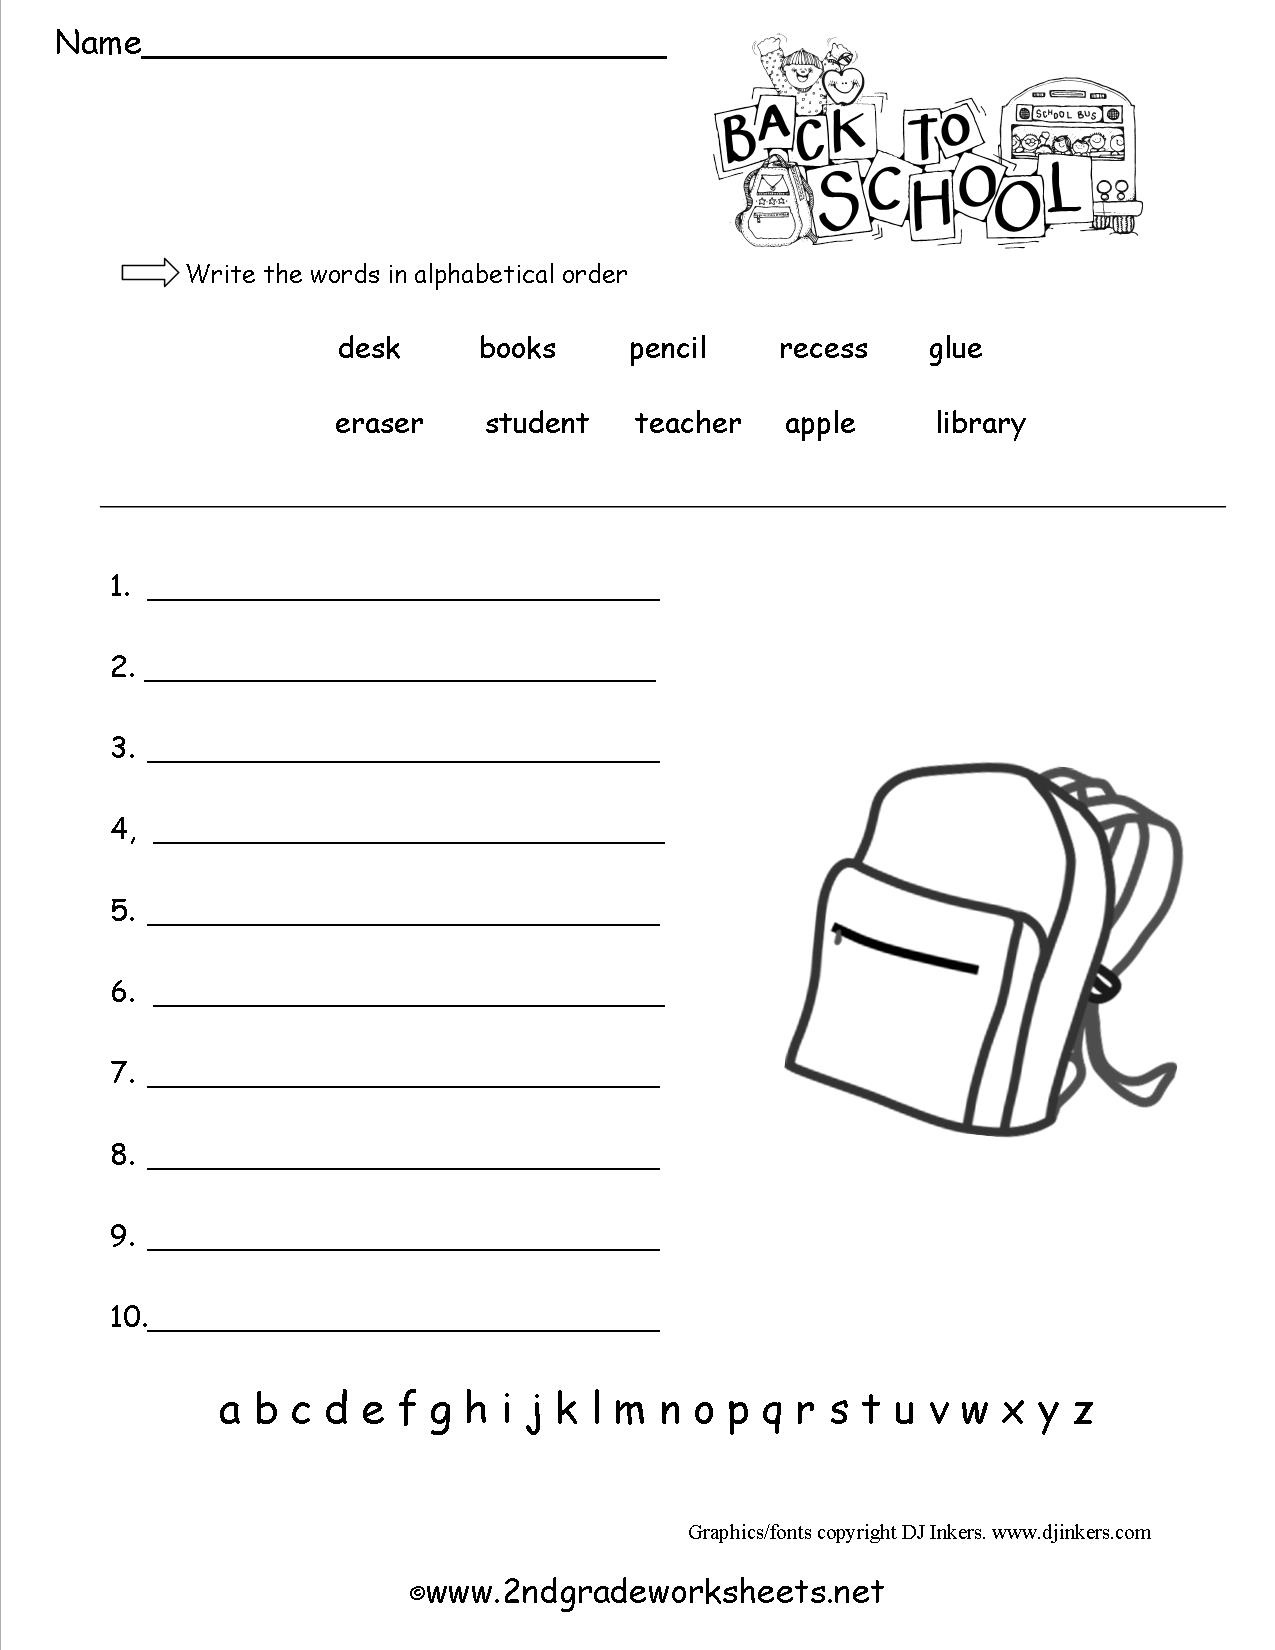 free-back-to-school-worksheets-and-printouts-free-printable-classroom-worksheets-free-printable